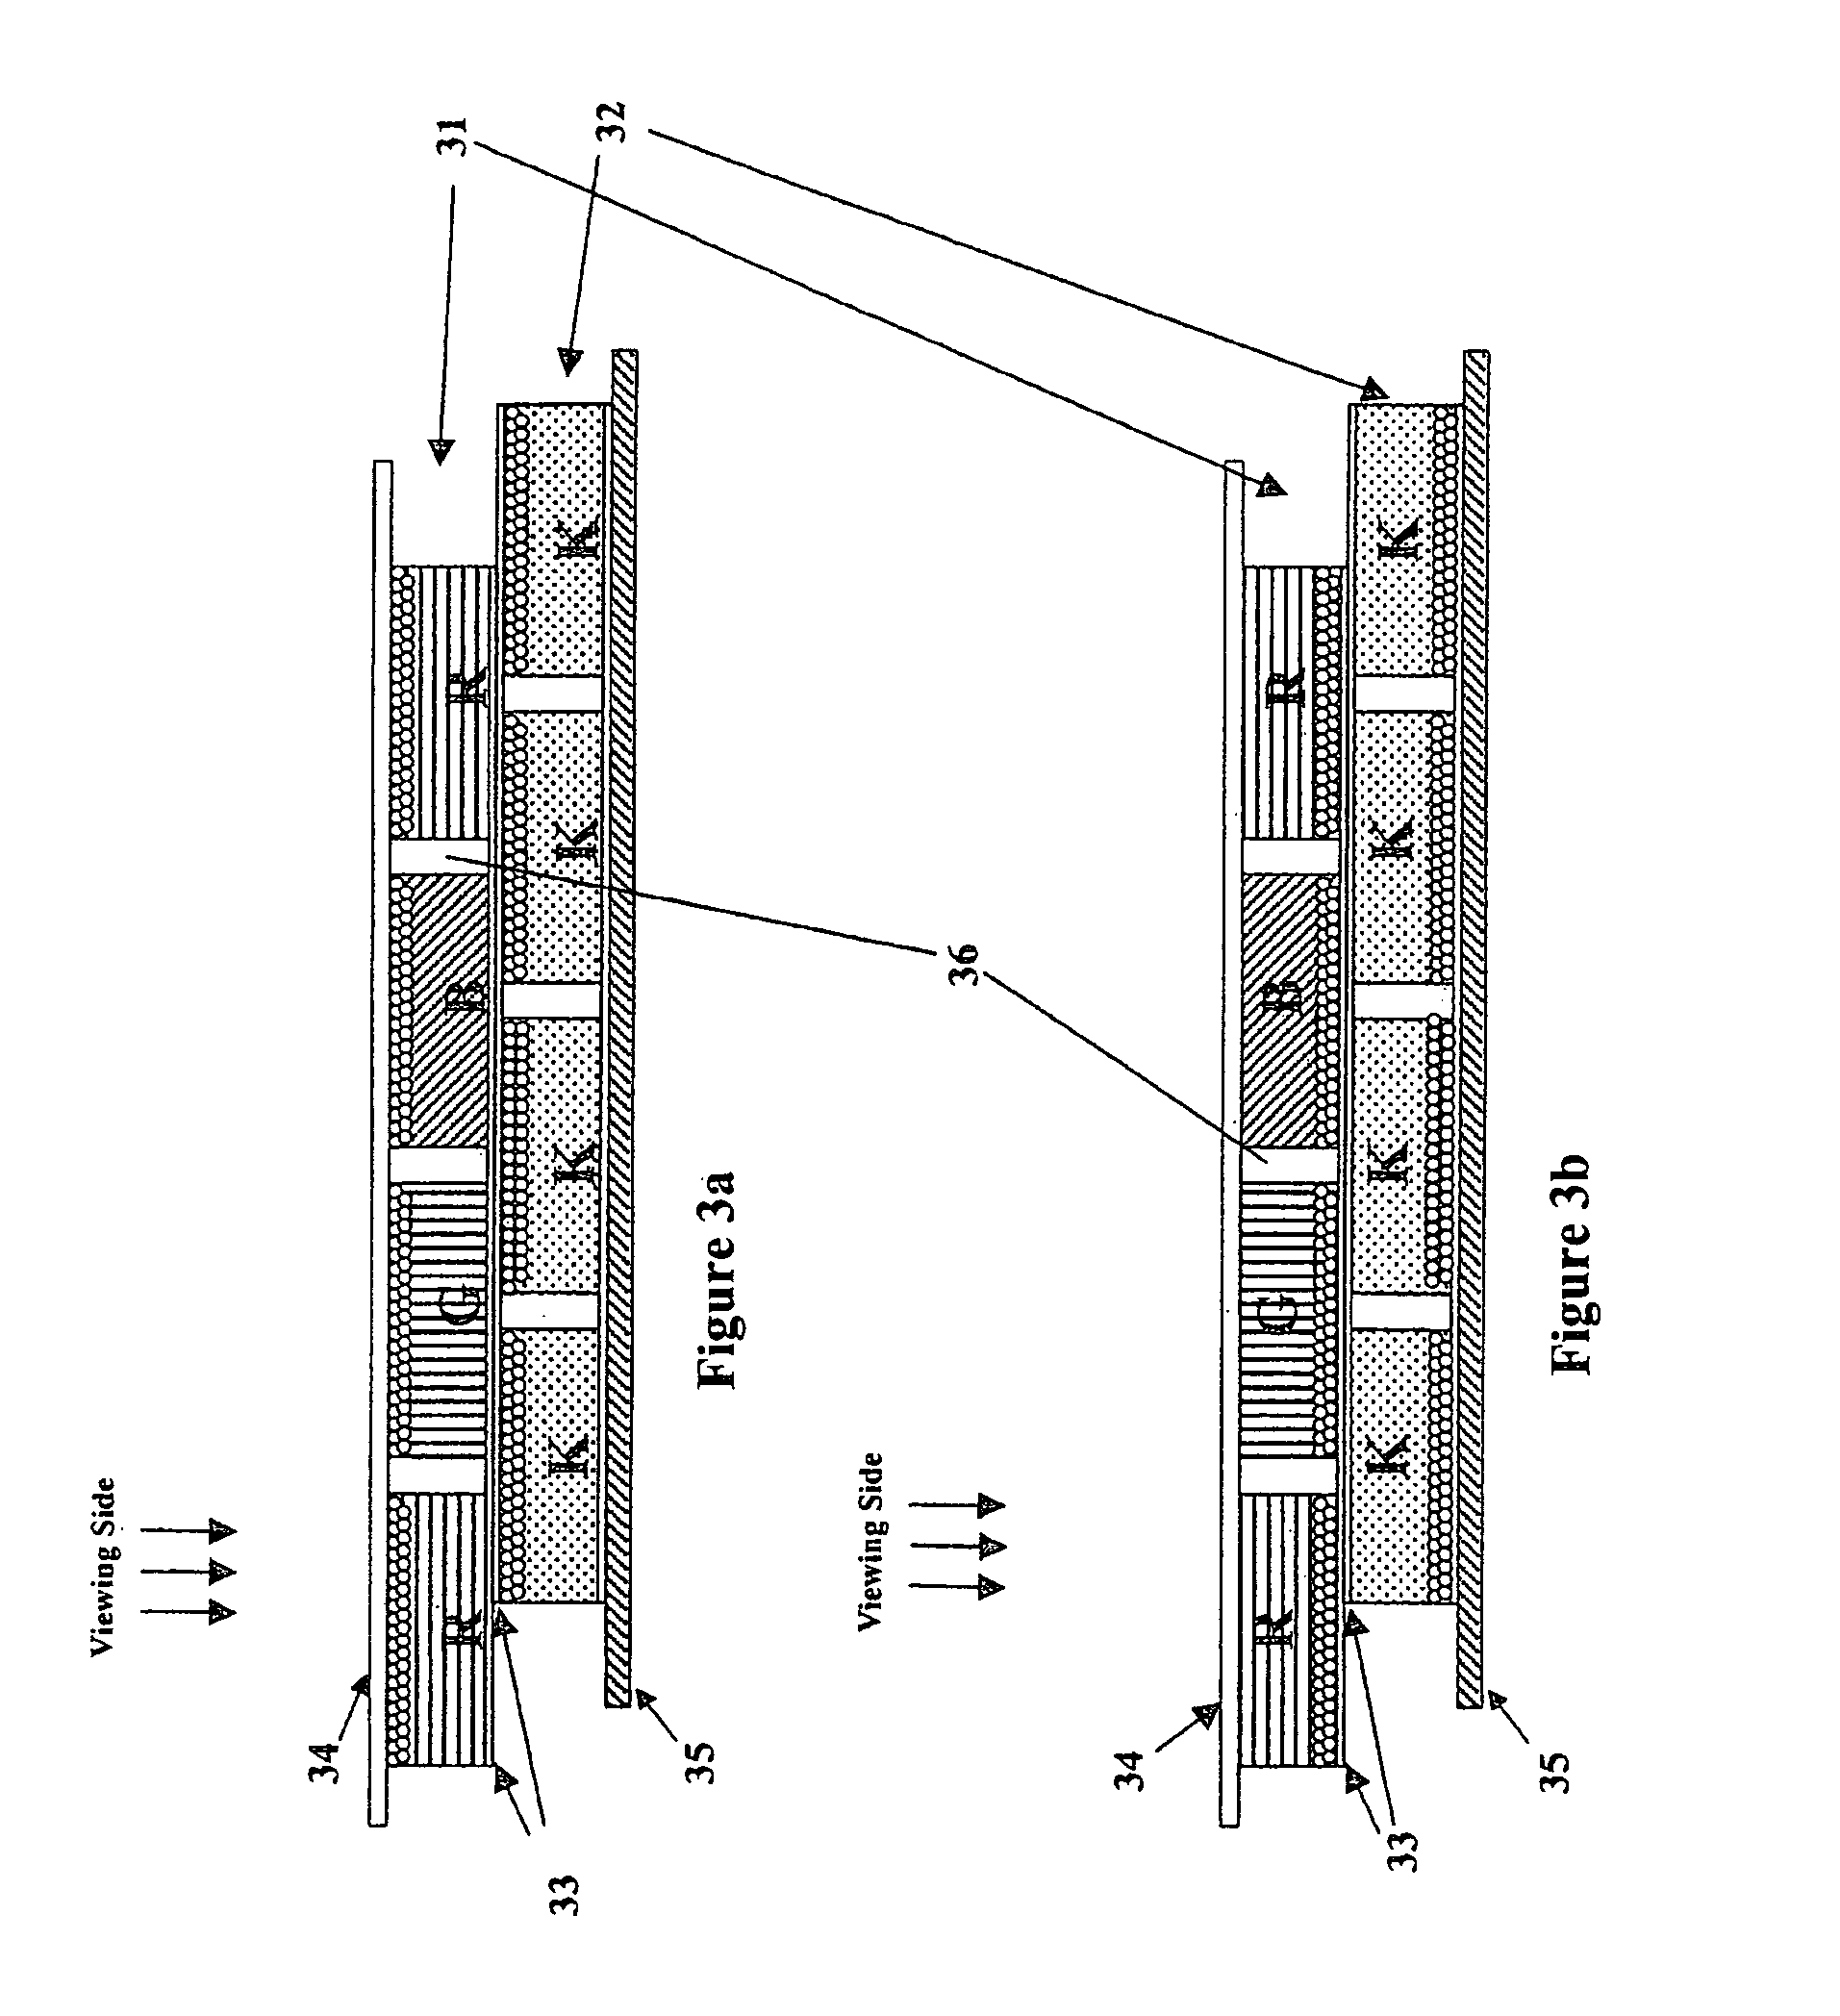 Composition and process for the manufacture of an improved electrophoretic display